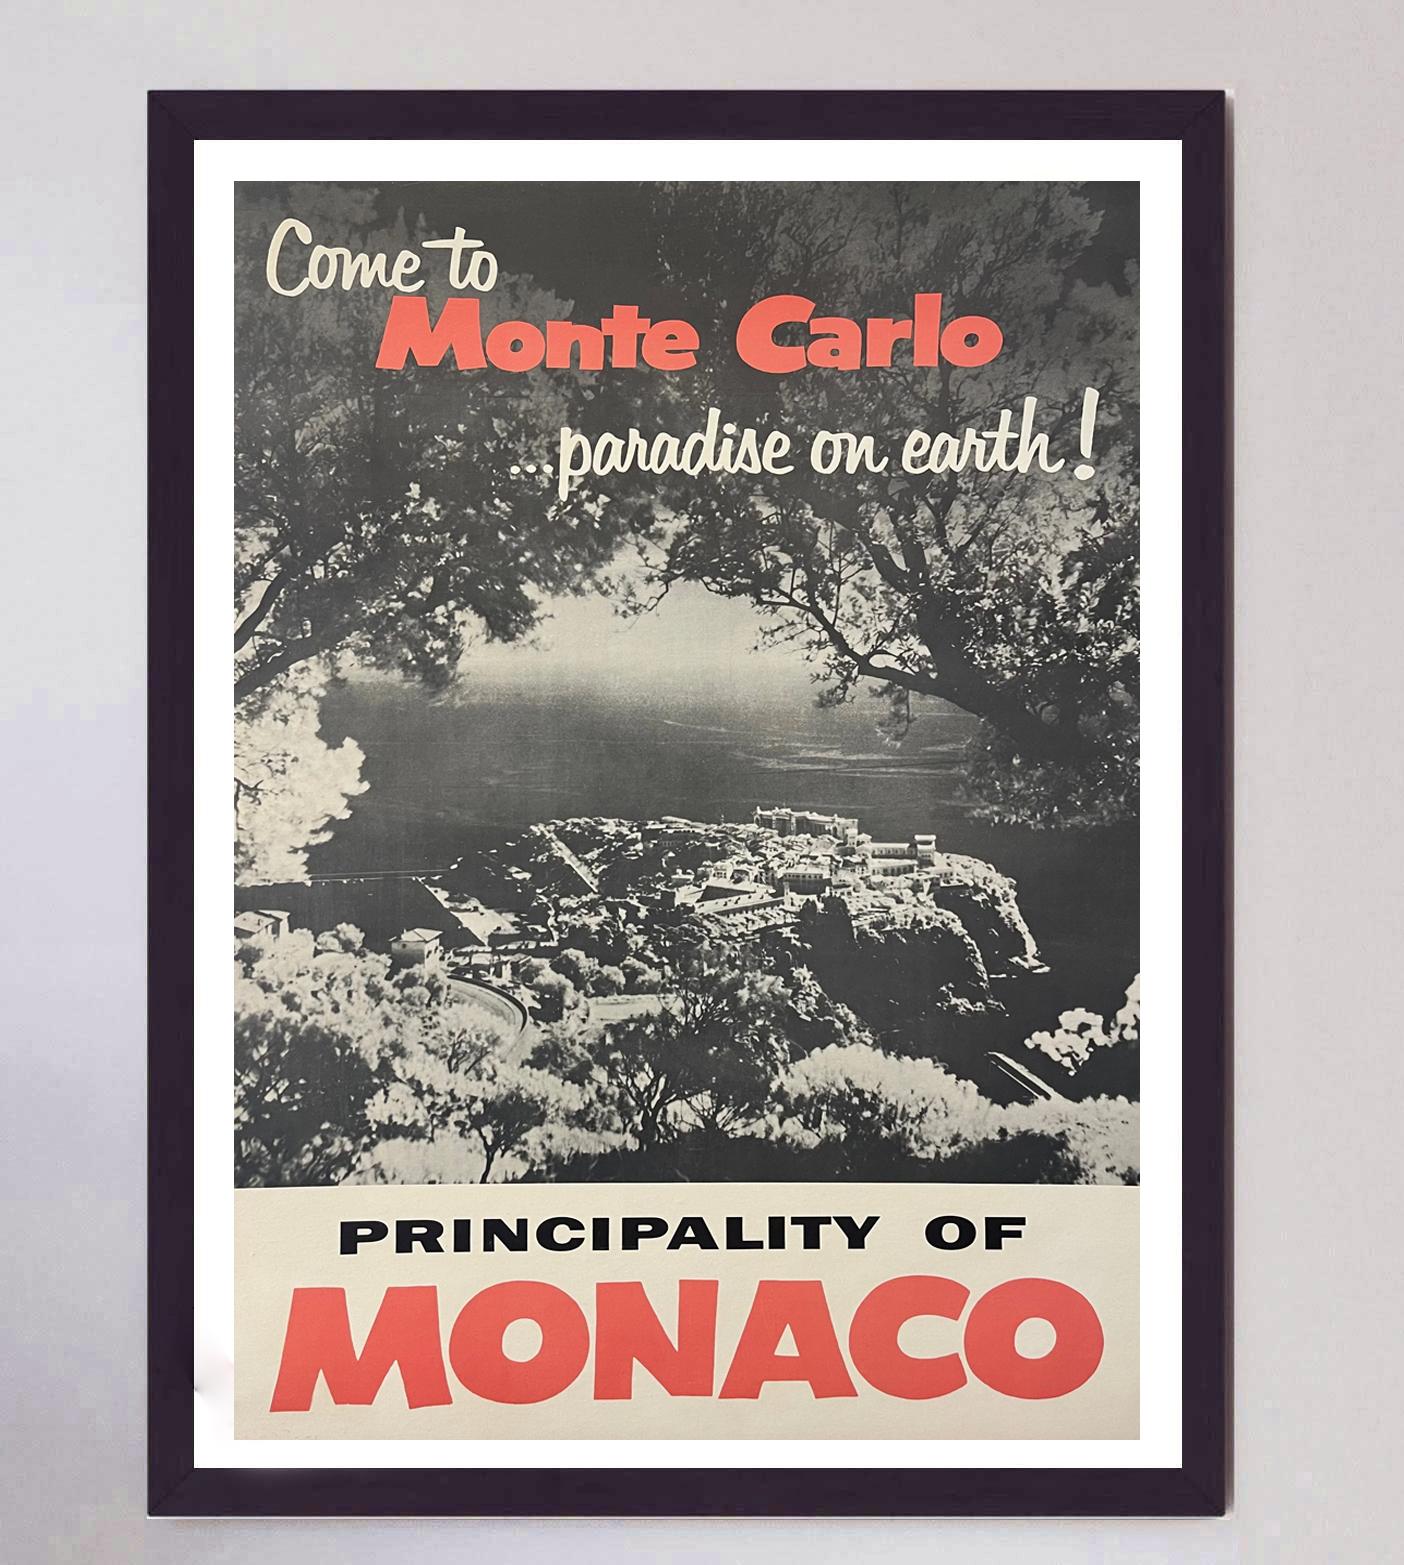 Absolutely stunning poster promoting the area of Monte-Carlo in Monaco from 1955. This mid-century piece has timeless class with a monochrome photograph of the coastal region with the text 